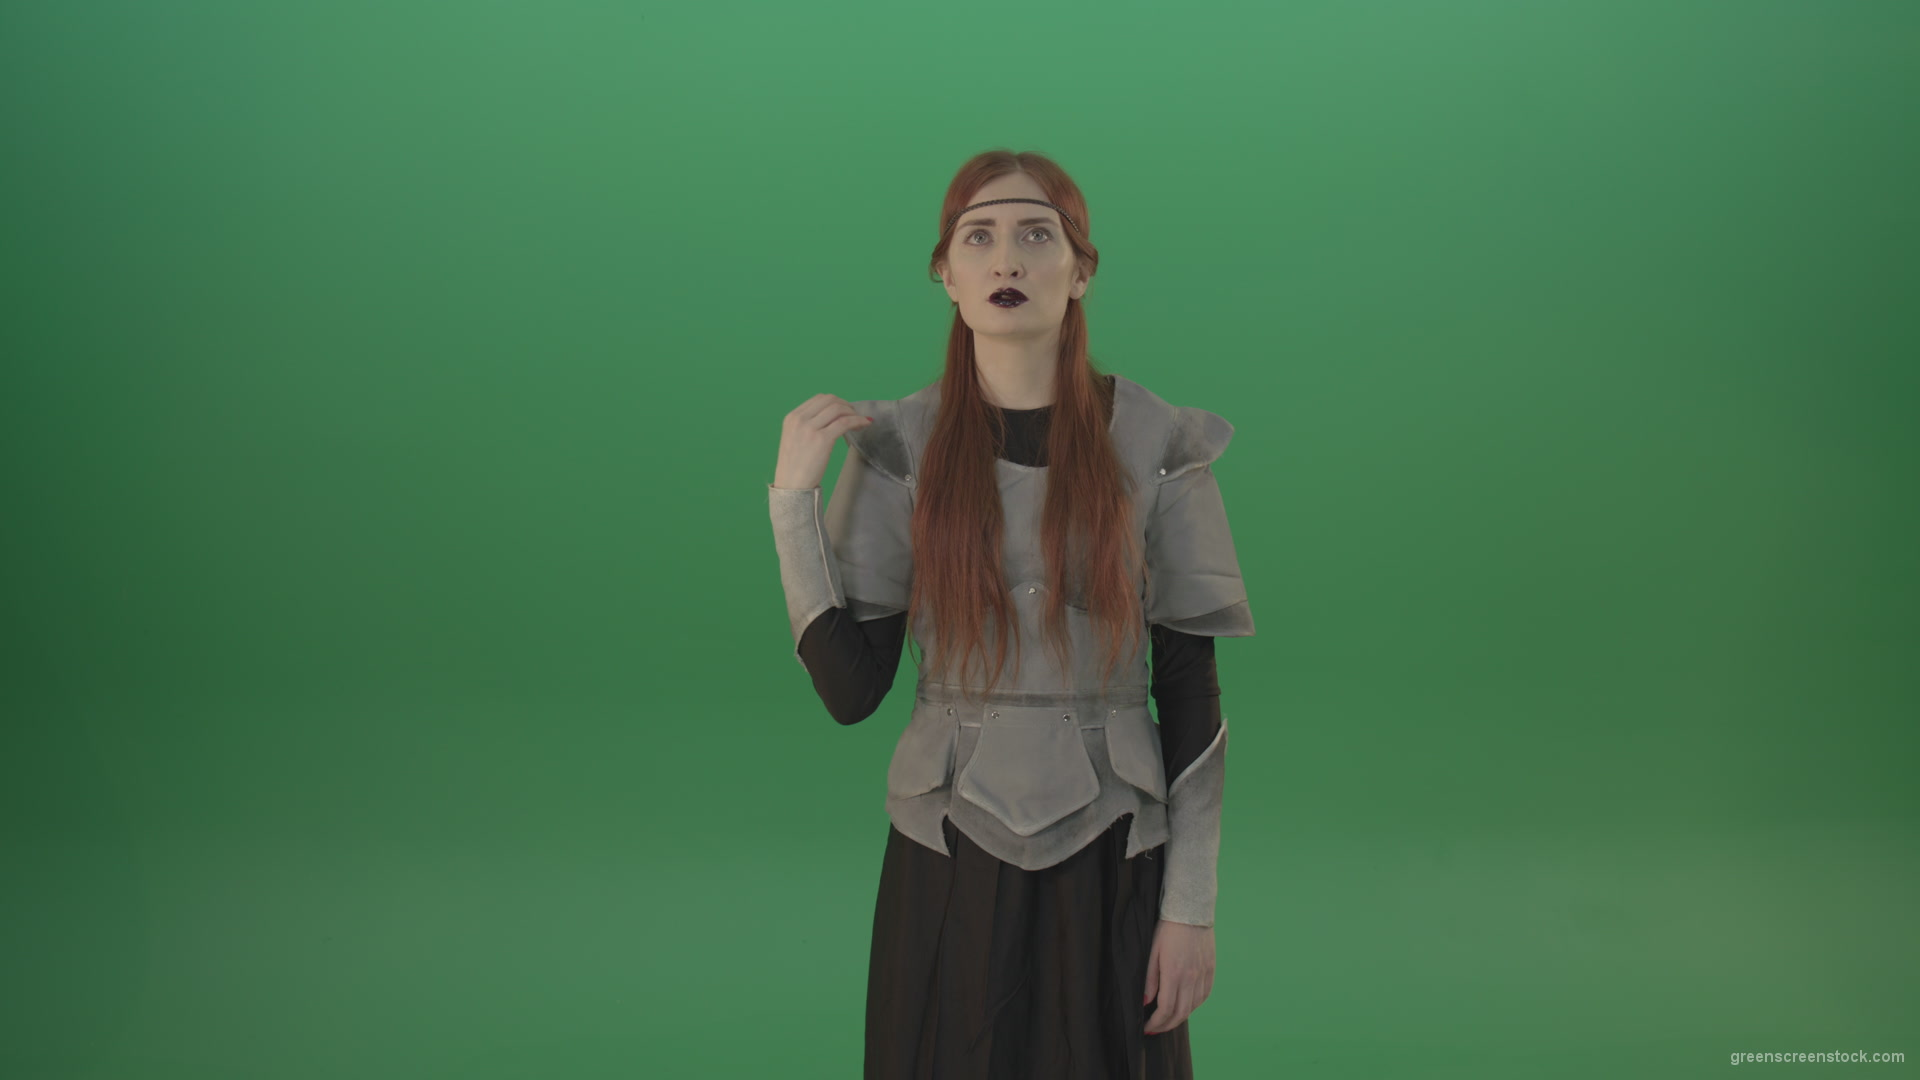 Actress-red-hair-girl-in-a-medieval-war-dress-crosses-praying-to-God-on-green-screen_005 Green Screen Stock